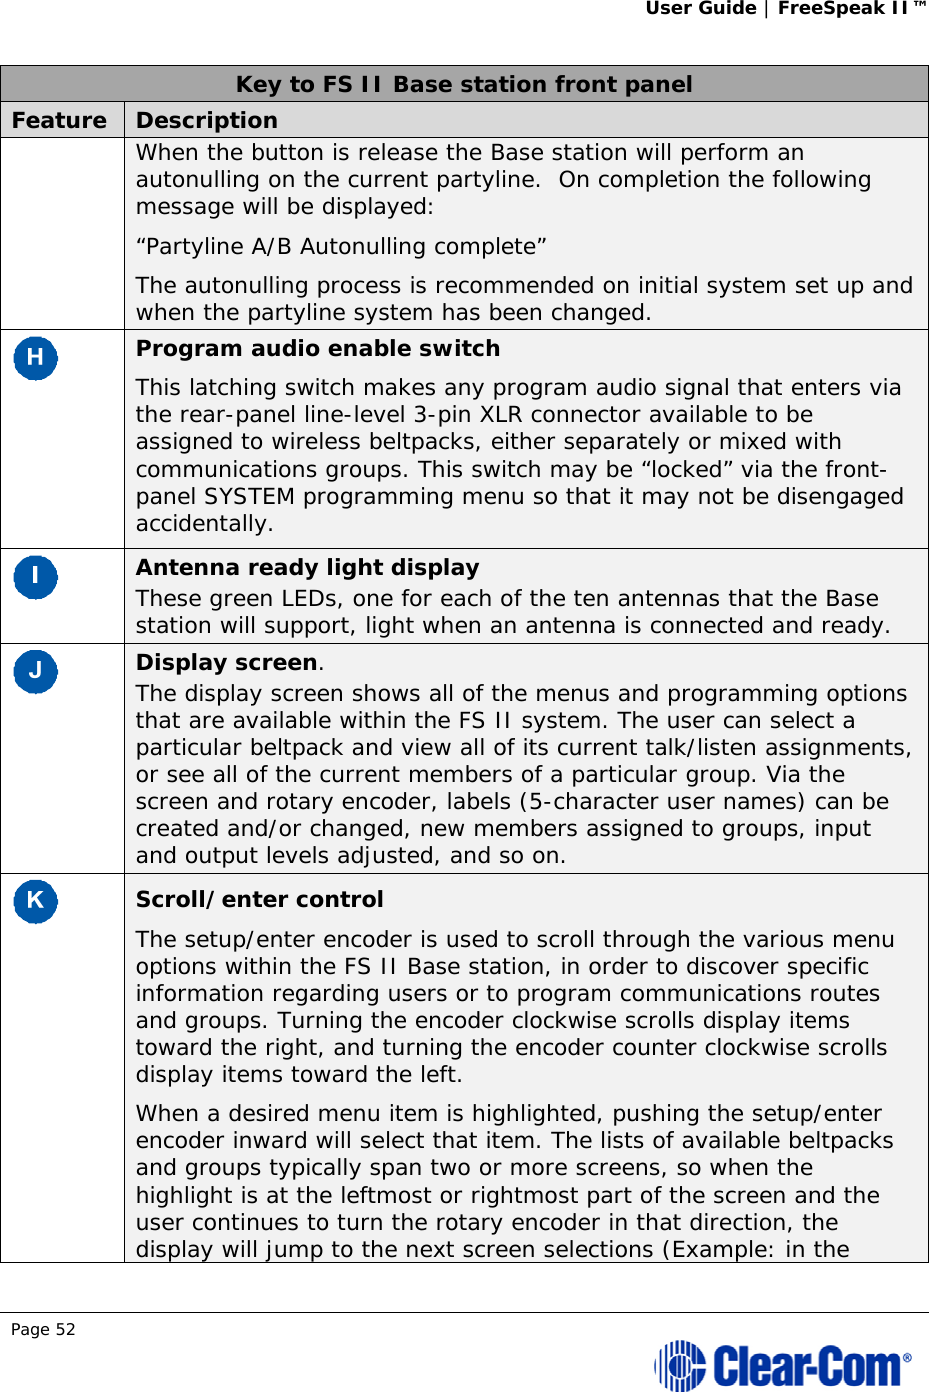 User Guide | FreeSpeak II™  Page 52  Key to FS II Base station front panel Feature  Description When the button is release the Base station will perform an autonulling on the current partyline.  On completion the following message will be displayed: “Partyline A/B Autonulling complete” The autonulling process is recommended on initial system set up and when the partyline system has been changed.  Program audio enable switch This latching switch makes any program audio signal that enters via the rear-panel line-level 3-pin XLR connector available to be assigned to wireless beltpacks, either separately or mixed with communications groups. This switch may be “locked” via the front-panel SYSTEM programming menu so that it may not be disengaged accidentally.  Antenna ready light display These green LEDs, one for each of the ten antennas that the Base station will support, light when an antenna is connected and ready.  Display screen.  The display screen shows all of the menus and programming options that are available within the FS II system. The user can select a particular beltpack and view all of its current talk/listen assignments, or see all of the current members of a particular group. Via the screen and rotary encoder, labels (5-character user names) can be created and/or changed, new members assigned to groups, input and output levels adjusted, and so on.  Scroll/enter control The setup/enter encoder is used to scroll through the various menu options within the FS II Base station, in order to discover specific information regarding users or to program communications routes and groups. Turning the encoder clockwise scrolls display items toward the right, and turning the encoder counter clockwise scrolls display items toward the left.  When a desired menu item is highlighted, pushing the setup/enter encoder inward will select that item. The lists of available beltpacks and groups typically span two or more screens, so when the highlight is at the leftmost or rightmost part of the screen and the user continues to turn the rotary encoder in that direction, the display will jump to the next screen selections (Example: in the 